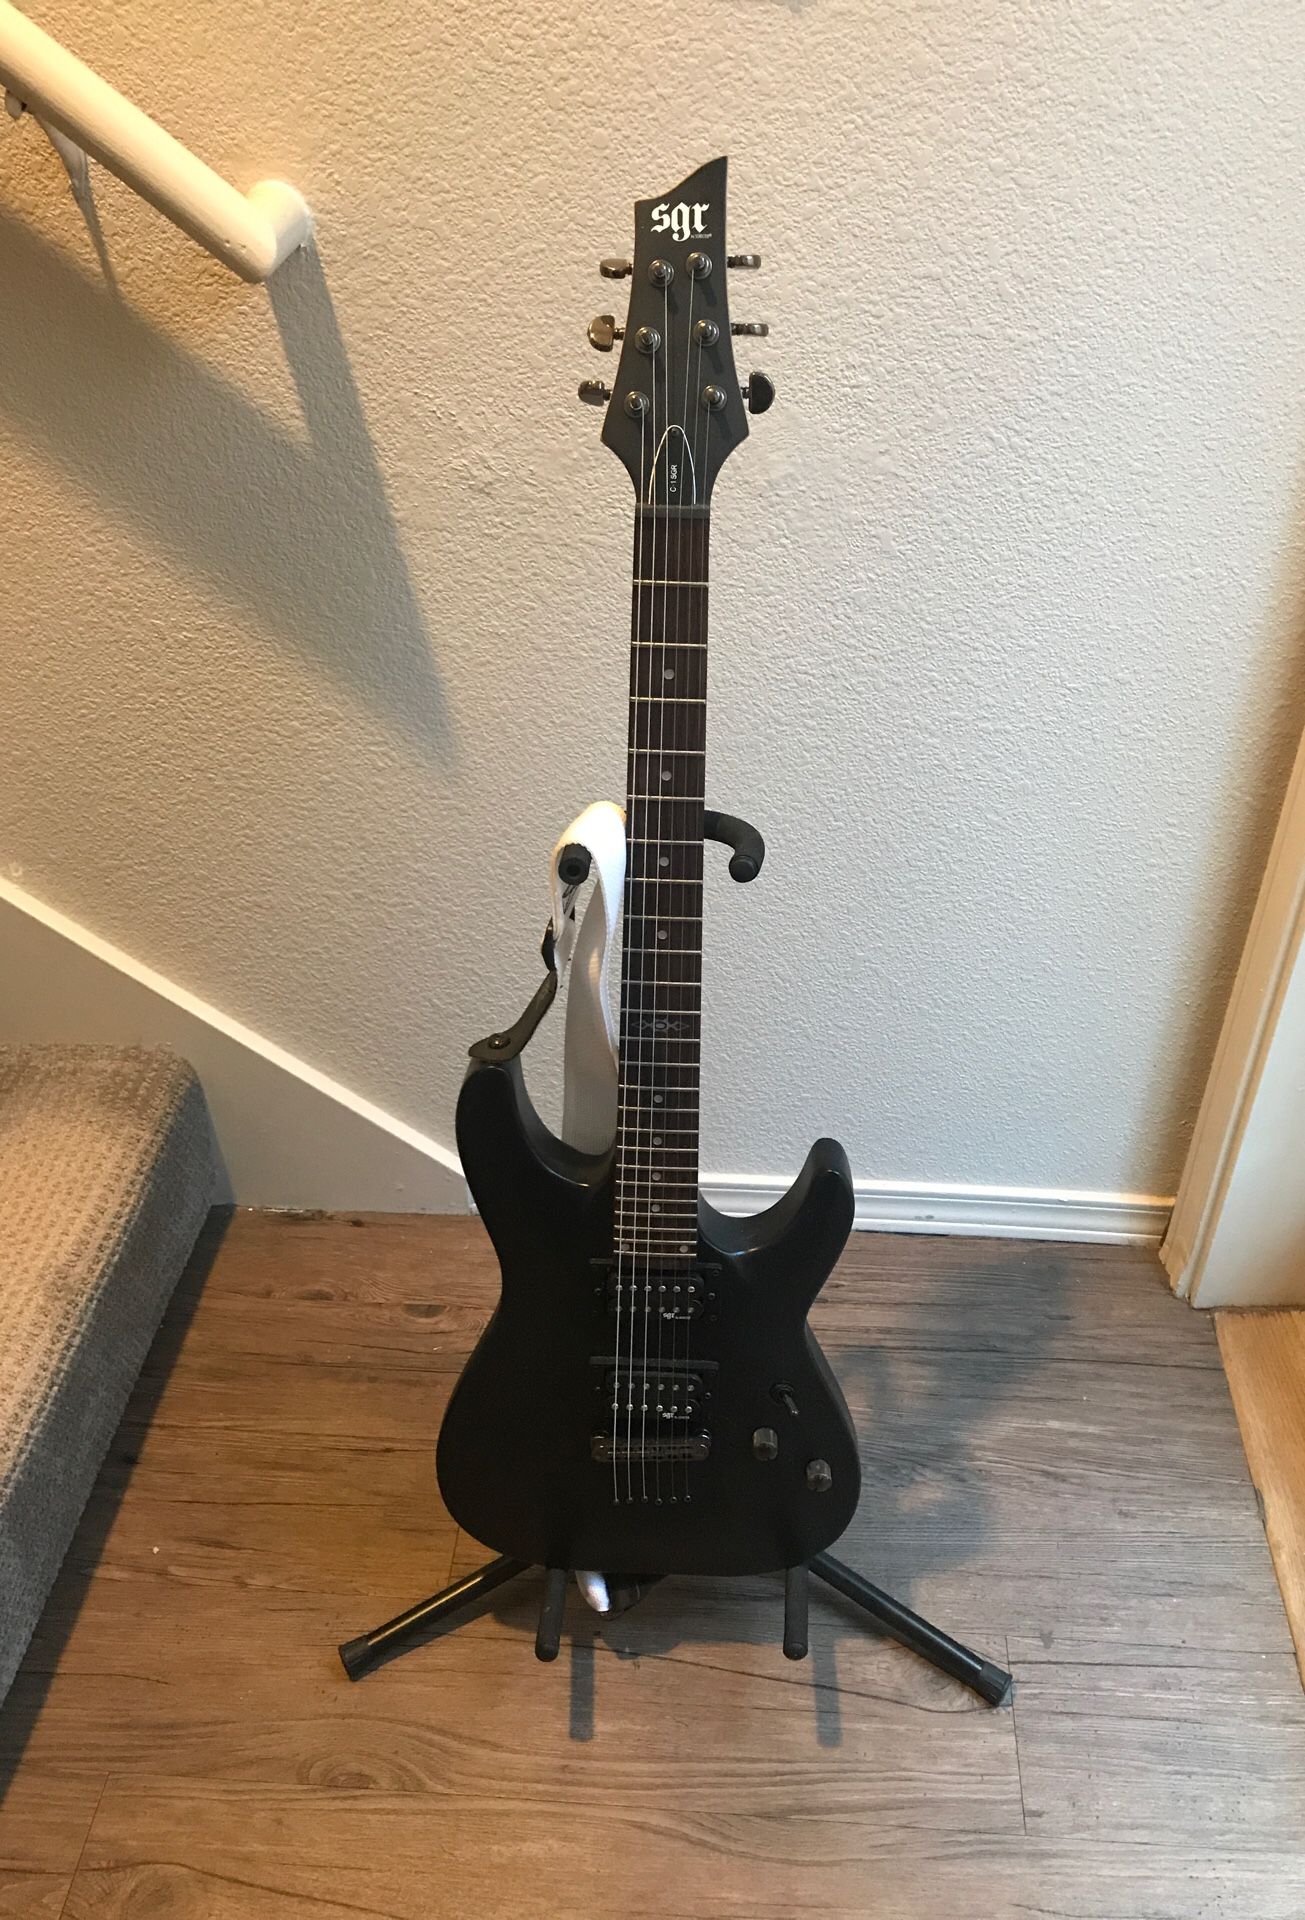 Schecter SGR Electric Guitar Like New Condition USB cable included